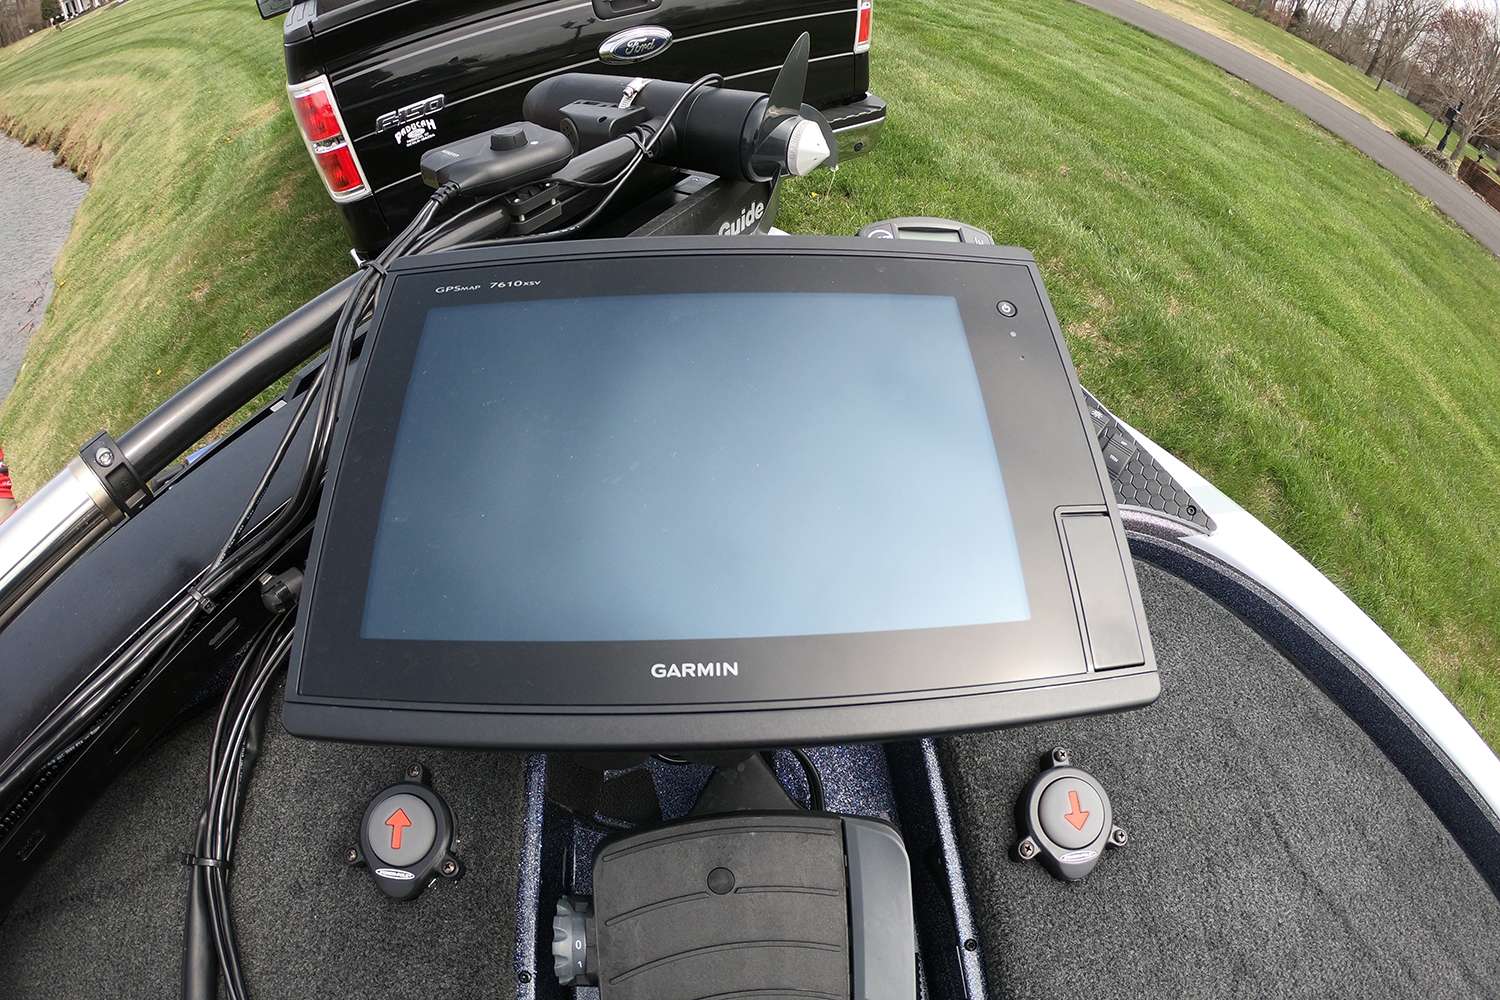 At the bow his main information center is a 10-inch Garmin 7610, which is ideal for all forms of subsurface information gathering, including Panoptix.